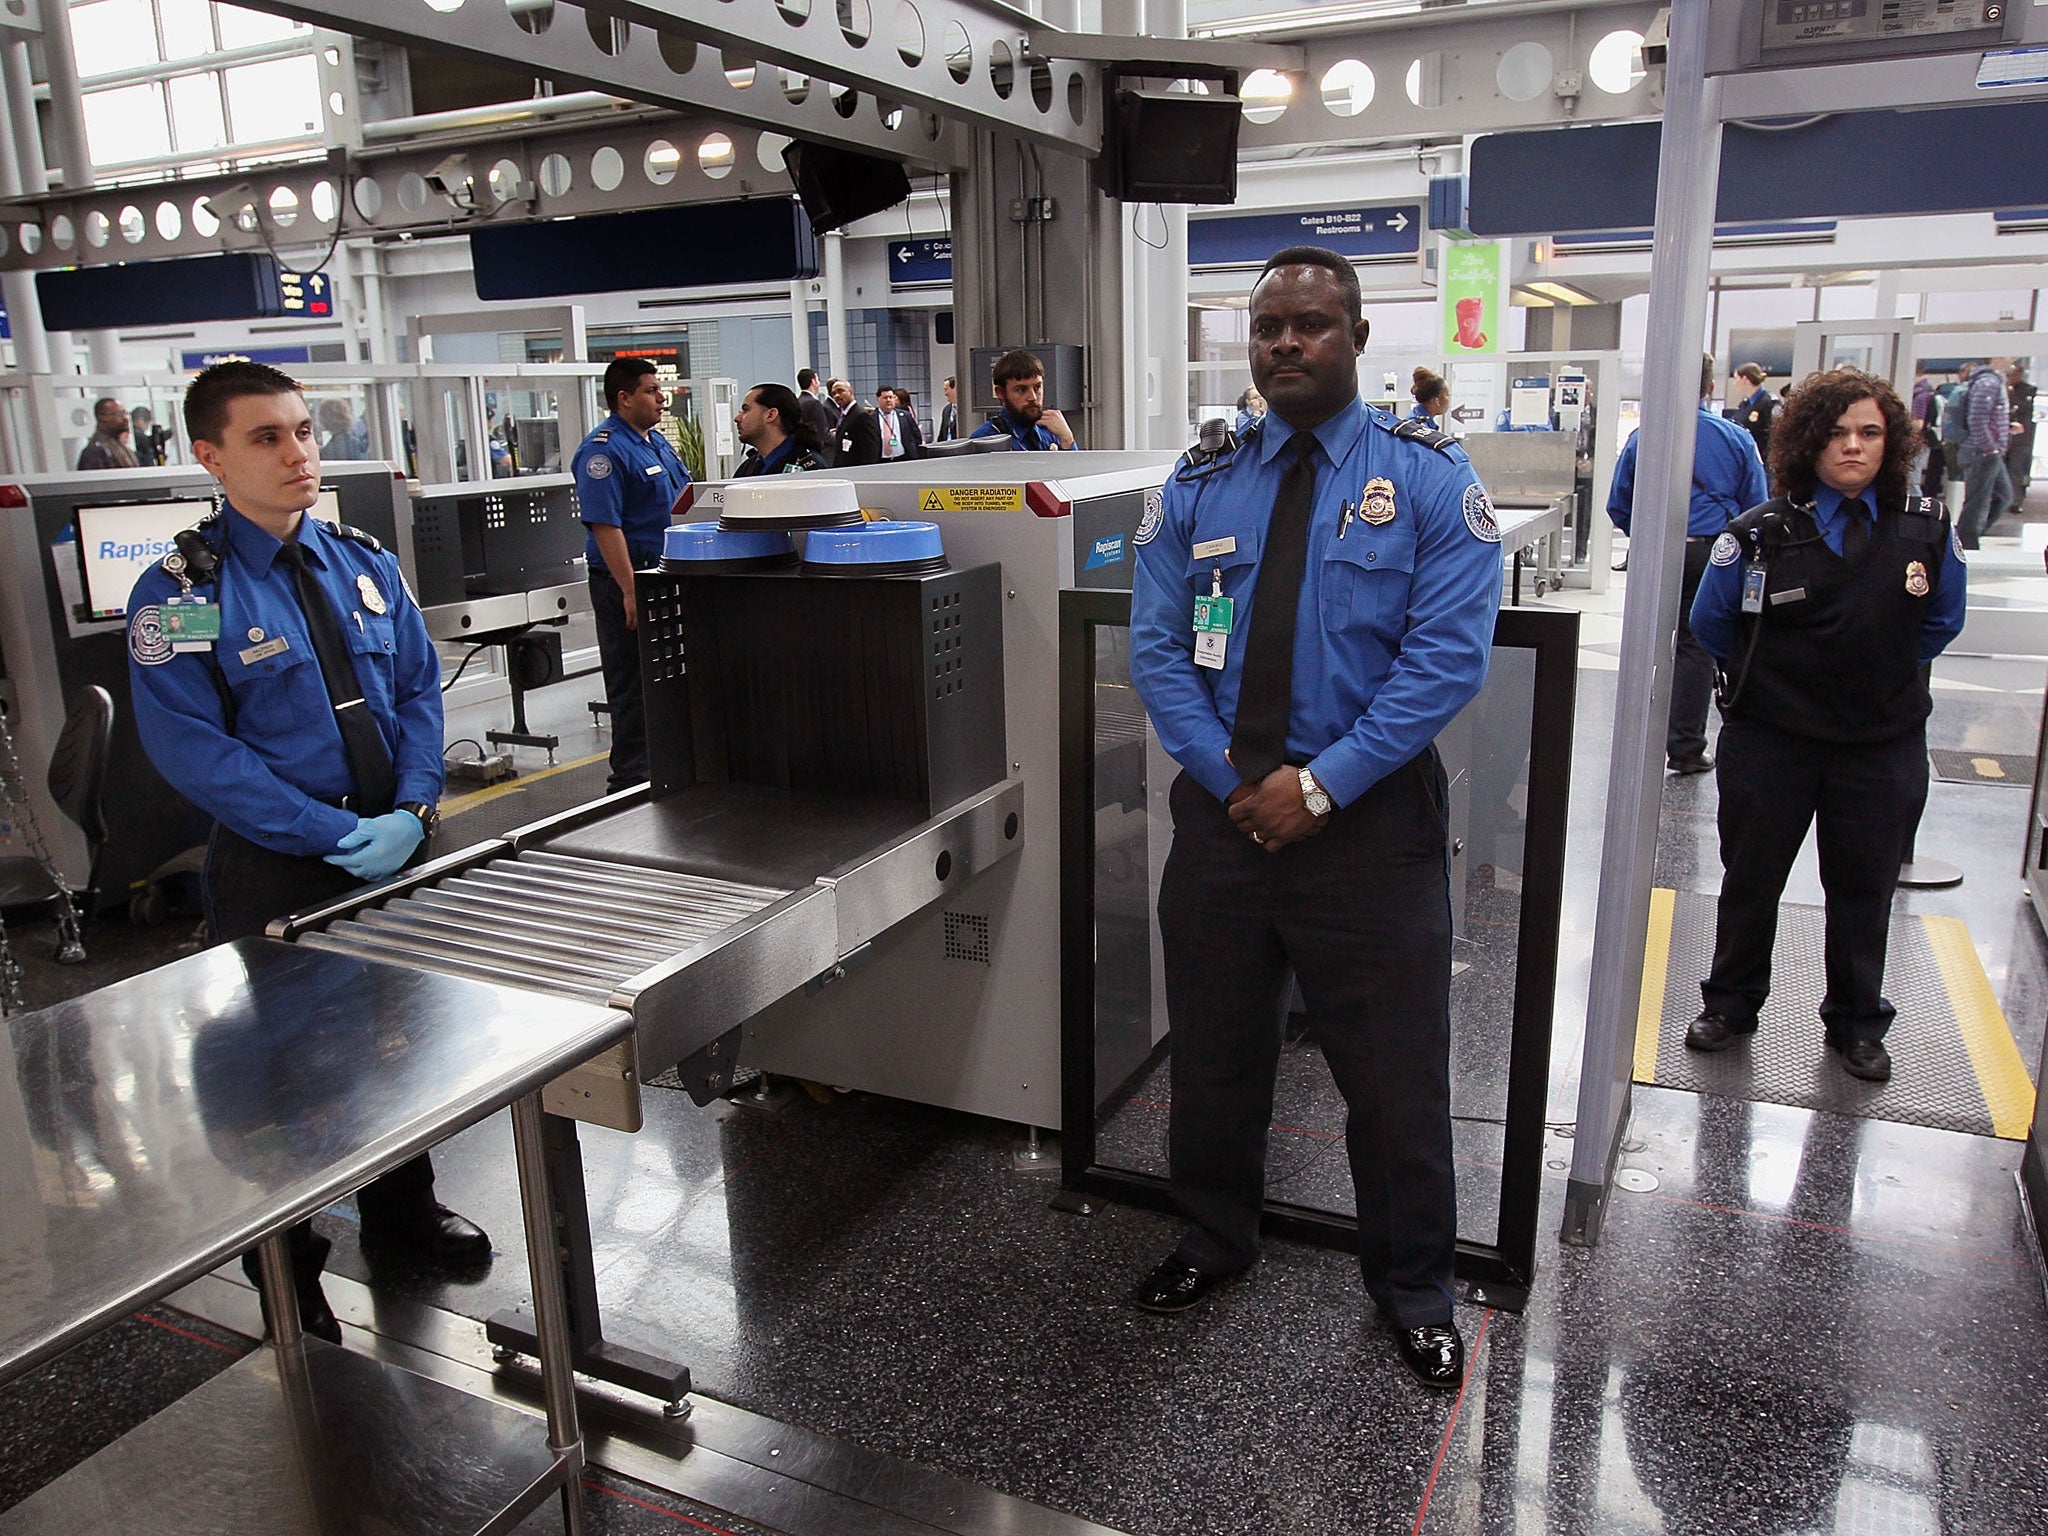 File: Security officers at a checkpoint at O'Hare International Airport in Chicago, Illinois. The US is considering increasing airport security measures in response to a new generation of 'creative' bomb threats from Syrian militant groups